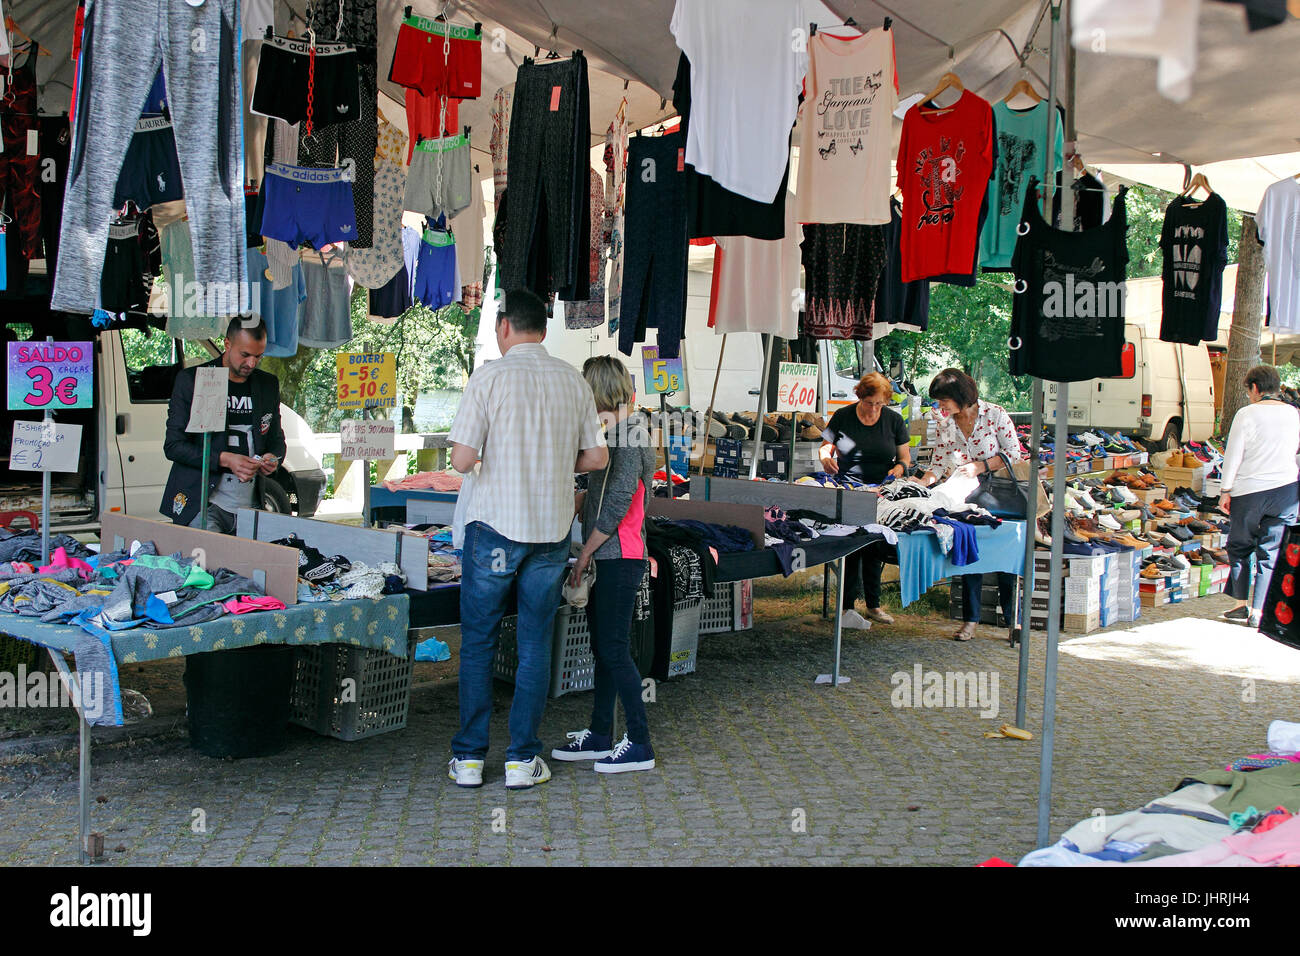 garments for sale at the Wednesday market Barca Portugal Stock Photo